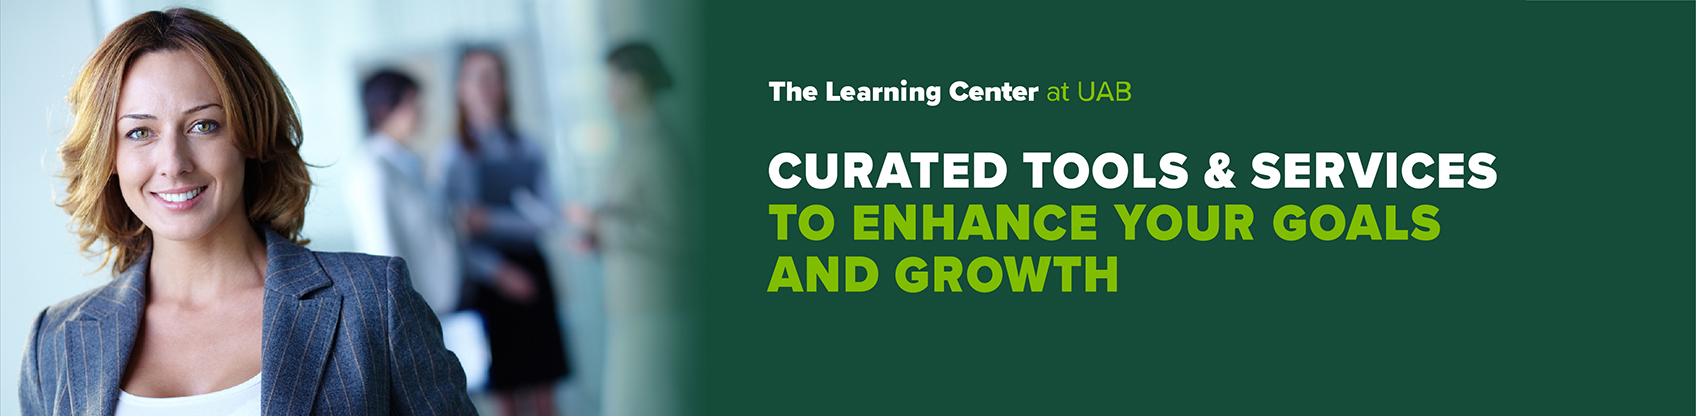 The Learning Center at UAB - Curated Tools & Services